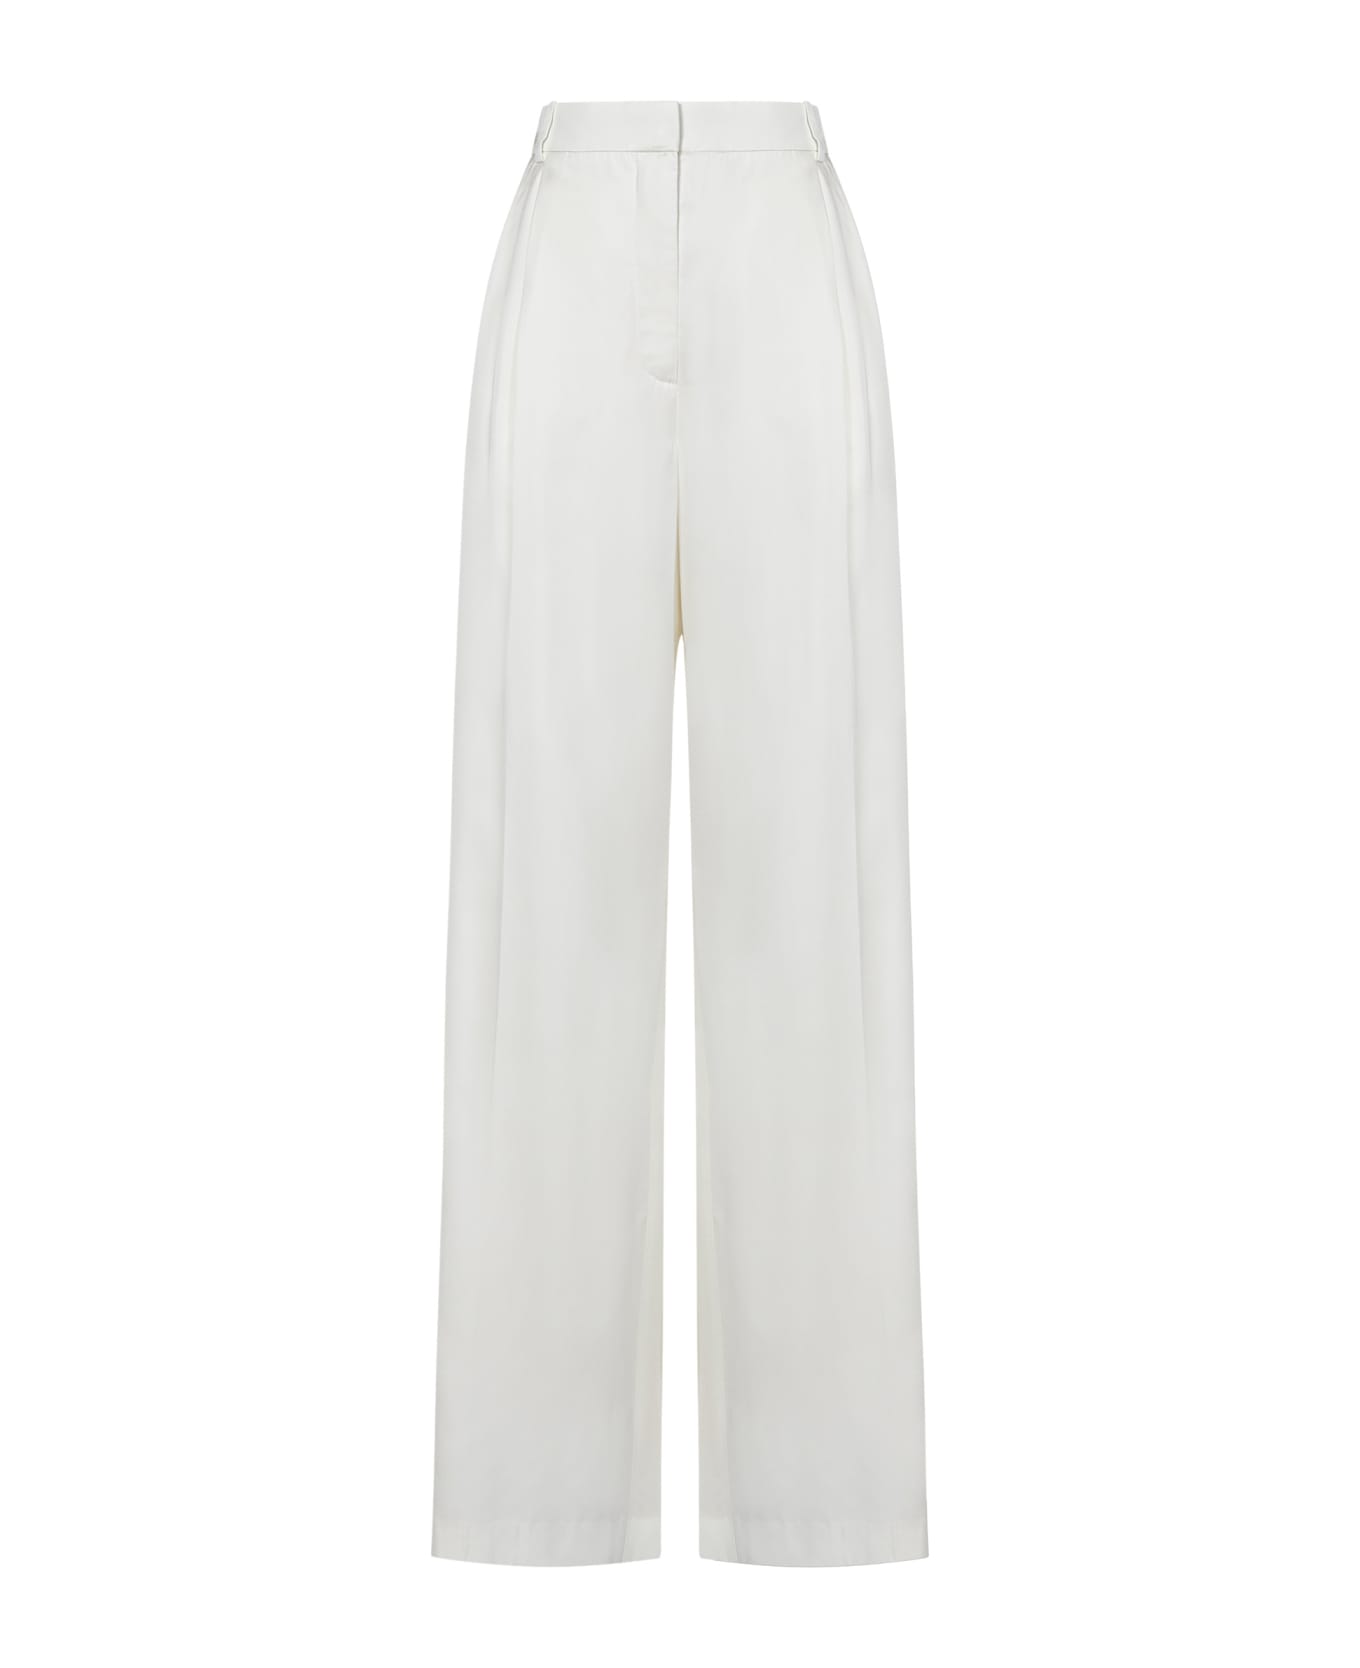 Alexander McQueen Trousers - White